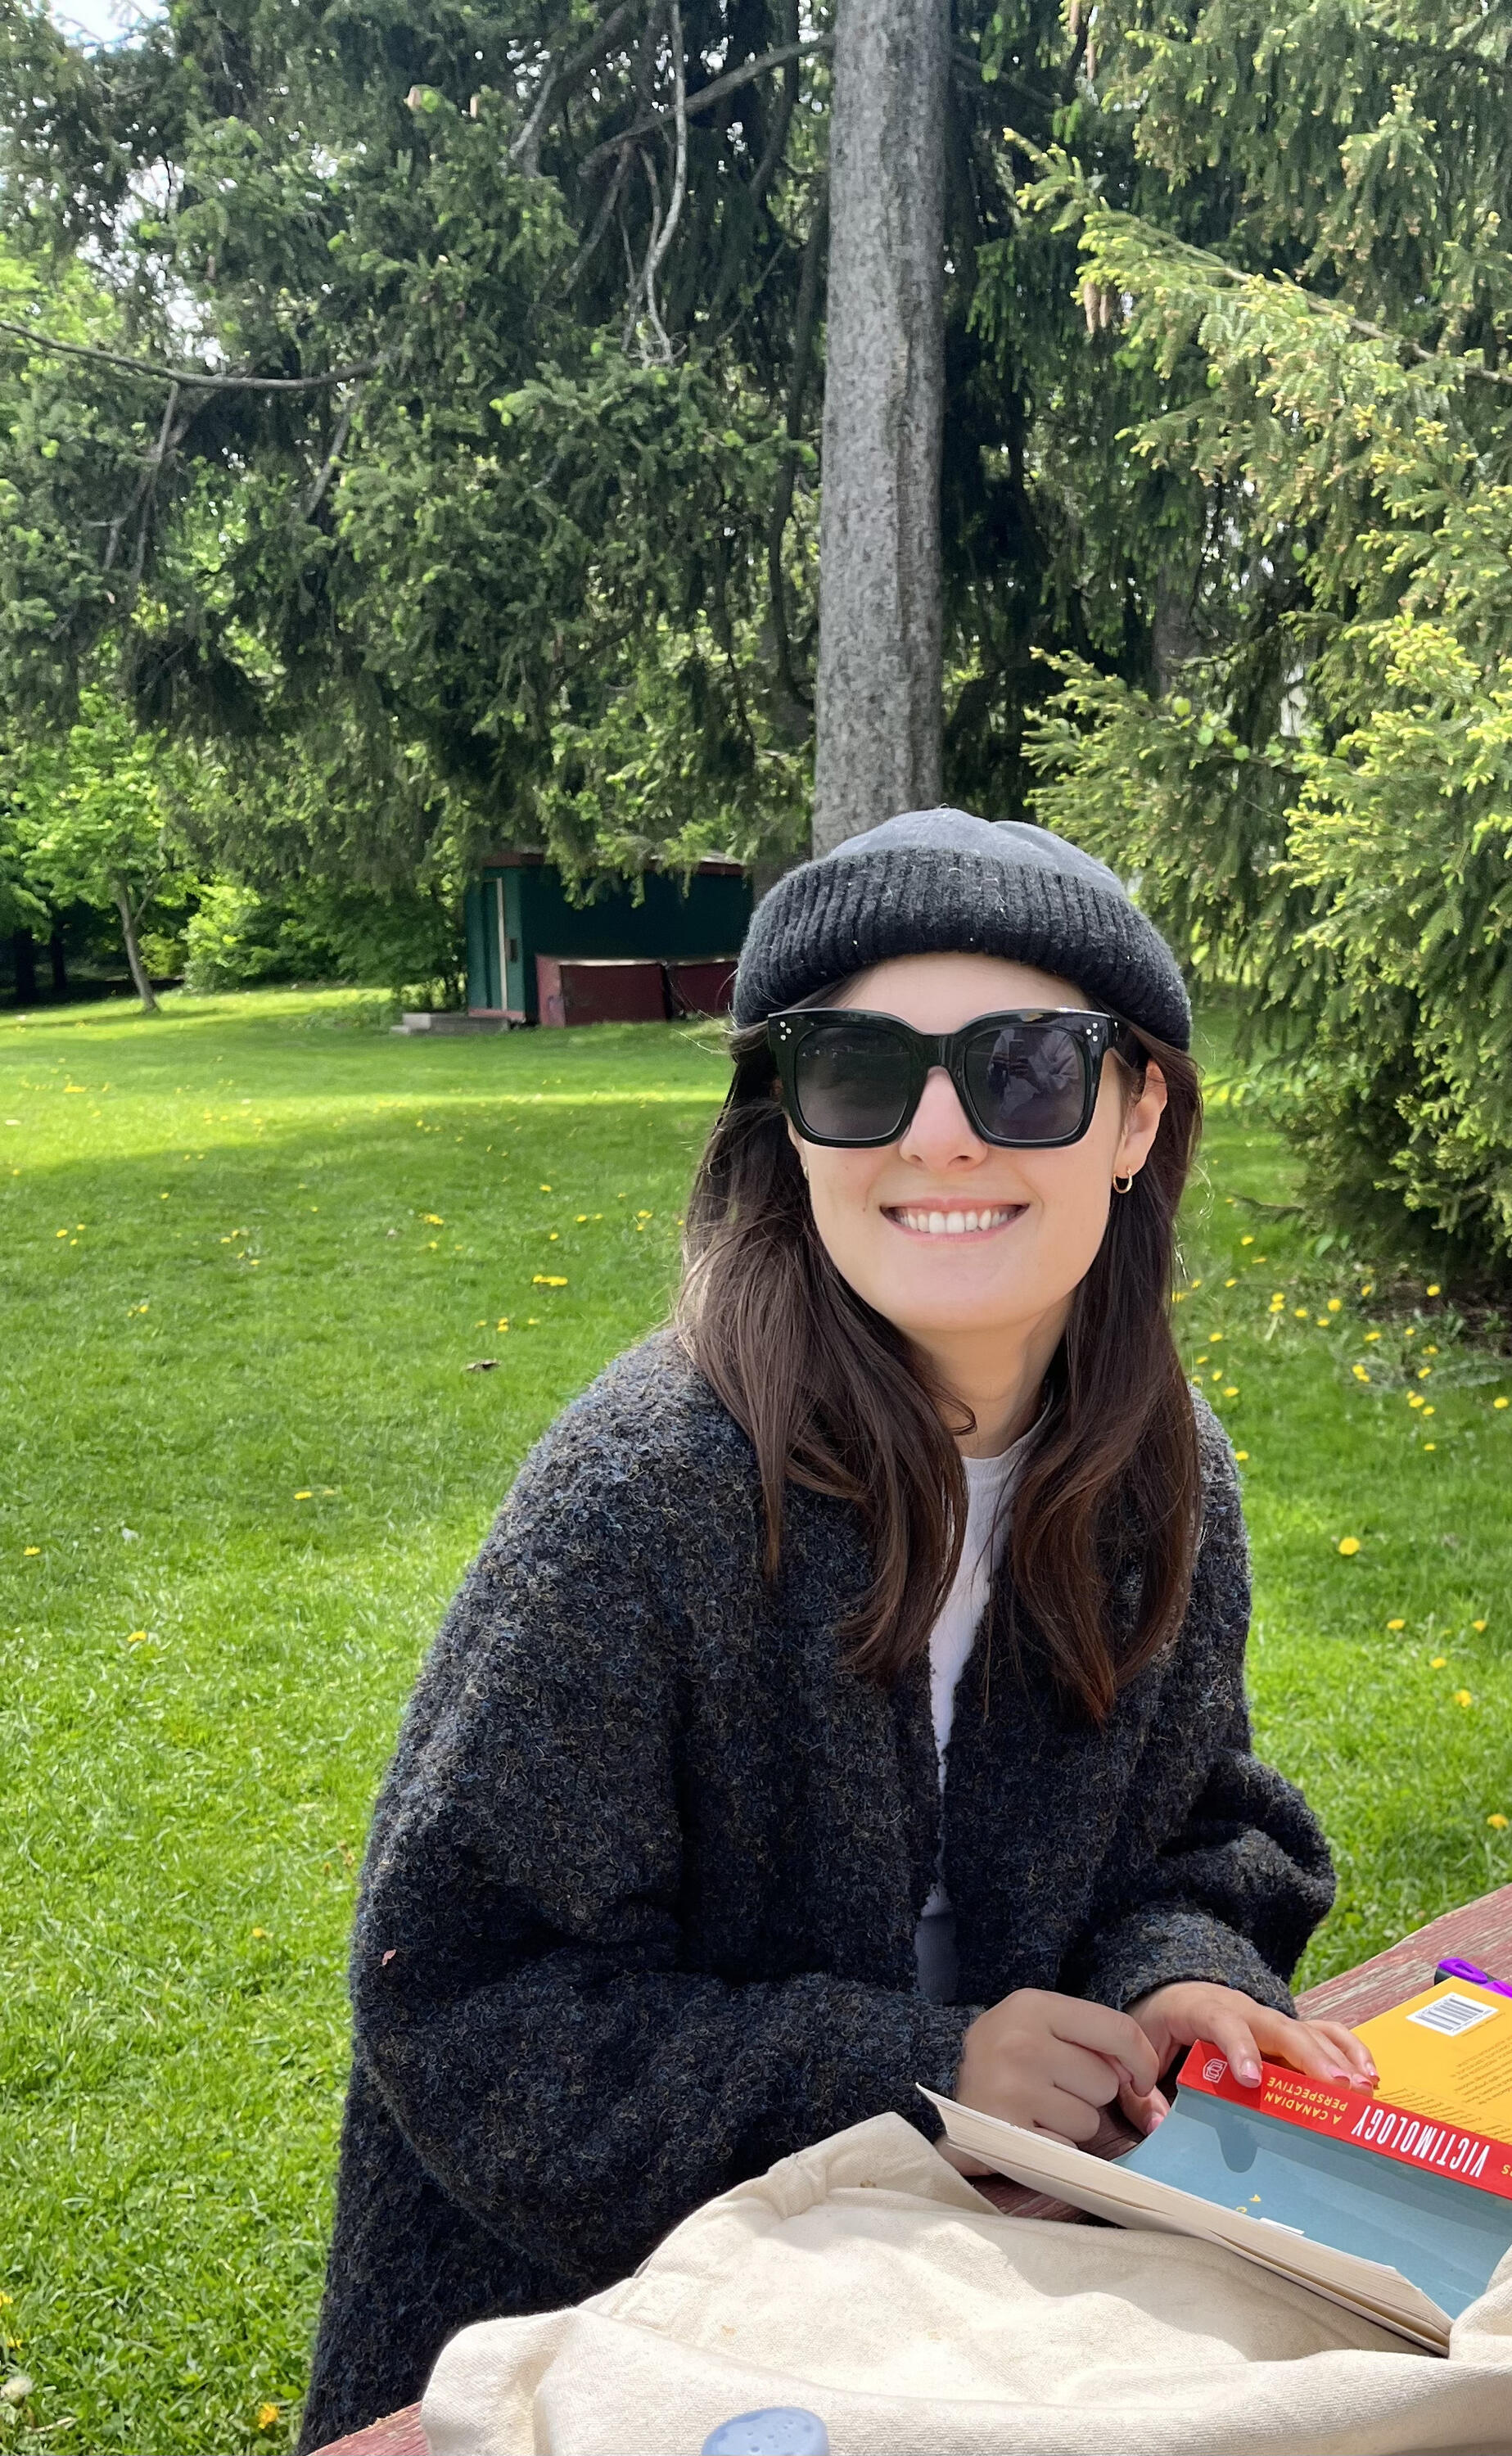 A photo of Sydney sitting at a table in a park, wearing sunglasses.